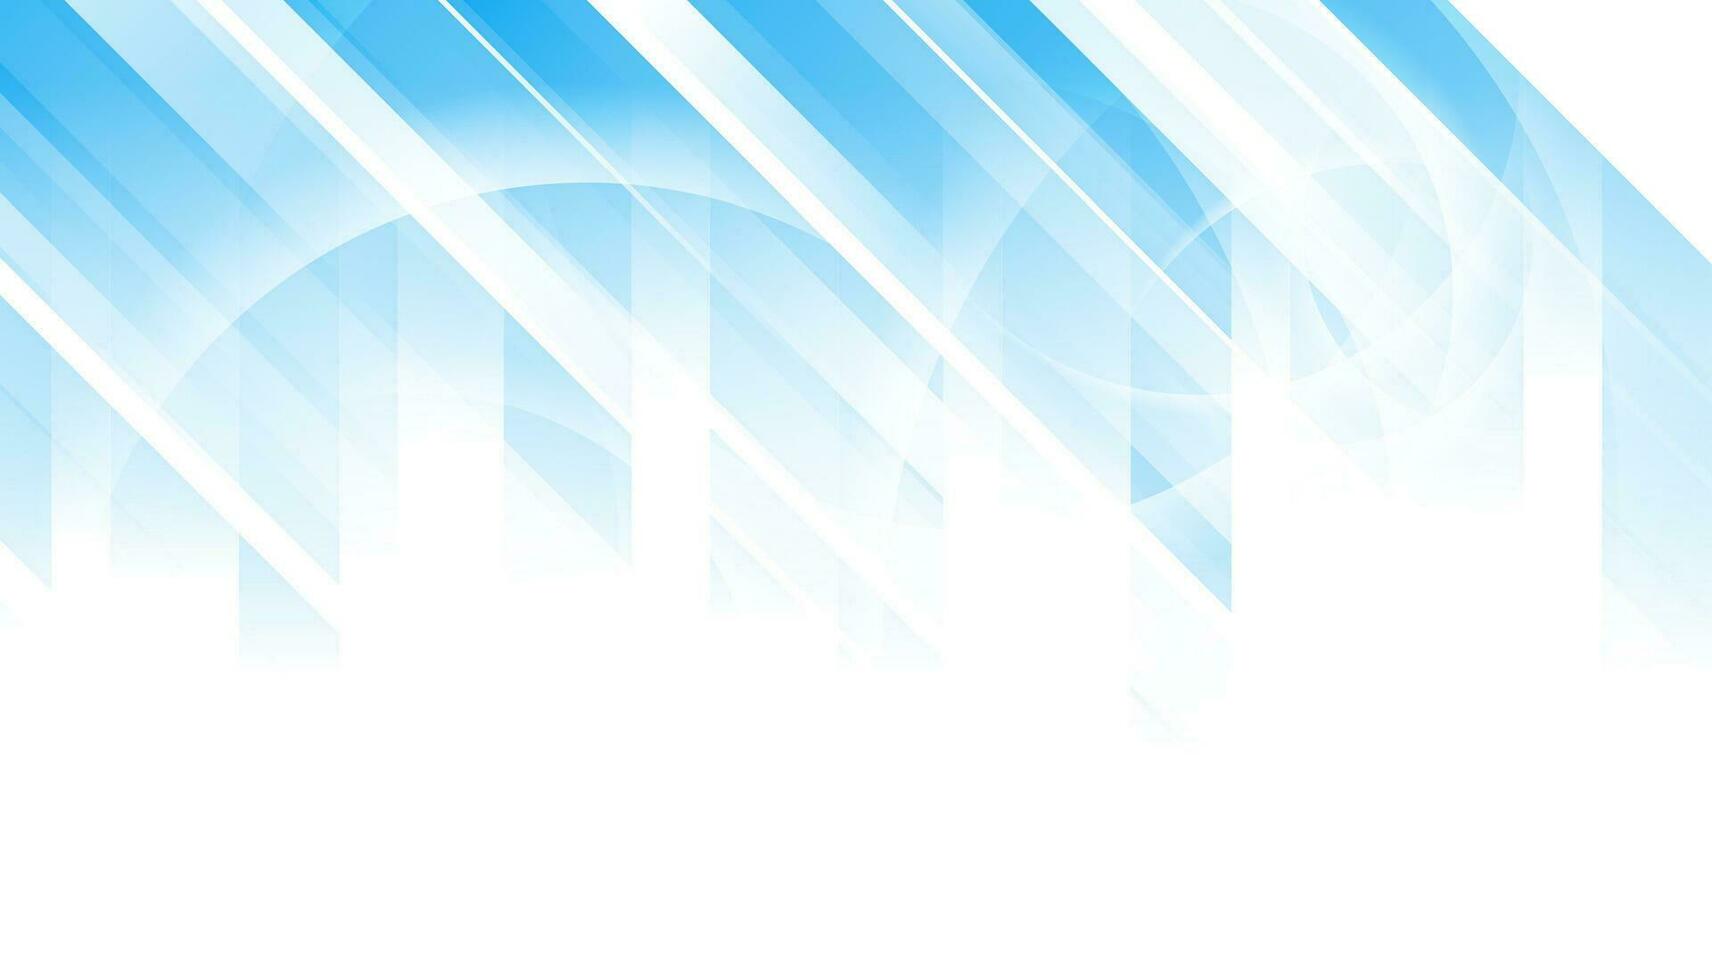 Shiny blue white stripes abstract geometric background vector